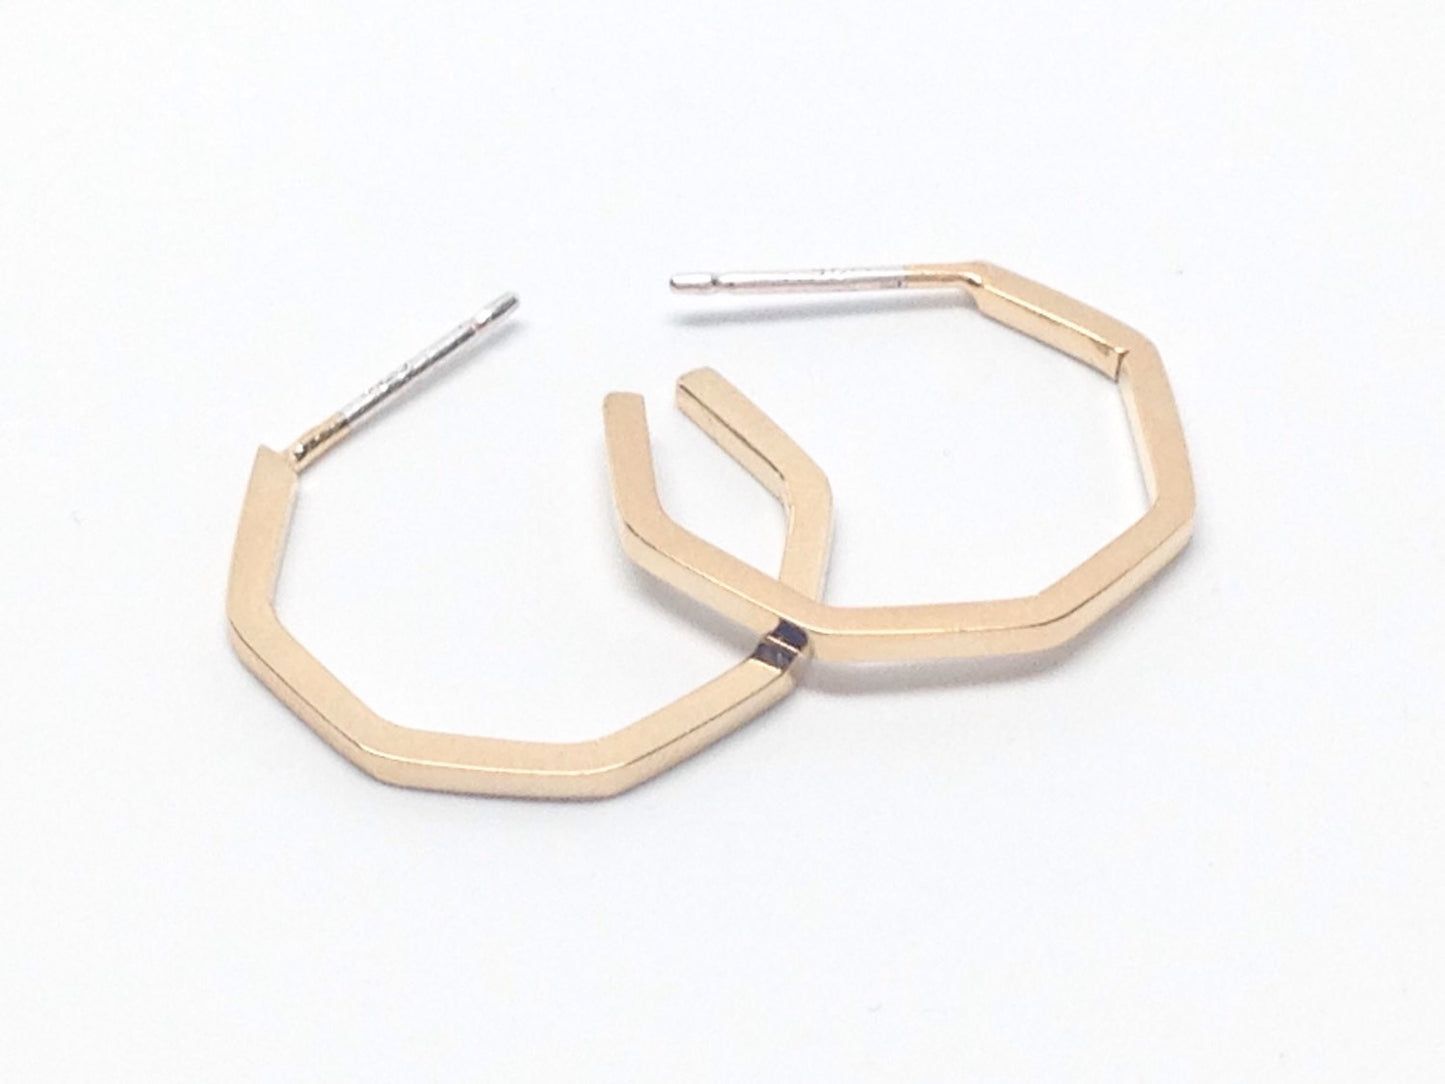 A pair of small gold plated geo hoops on a white background